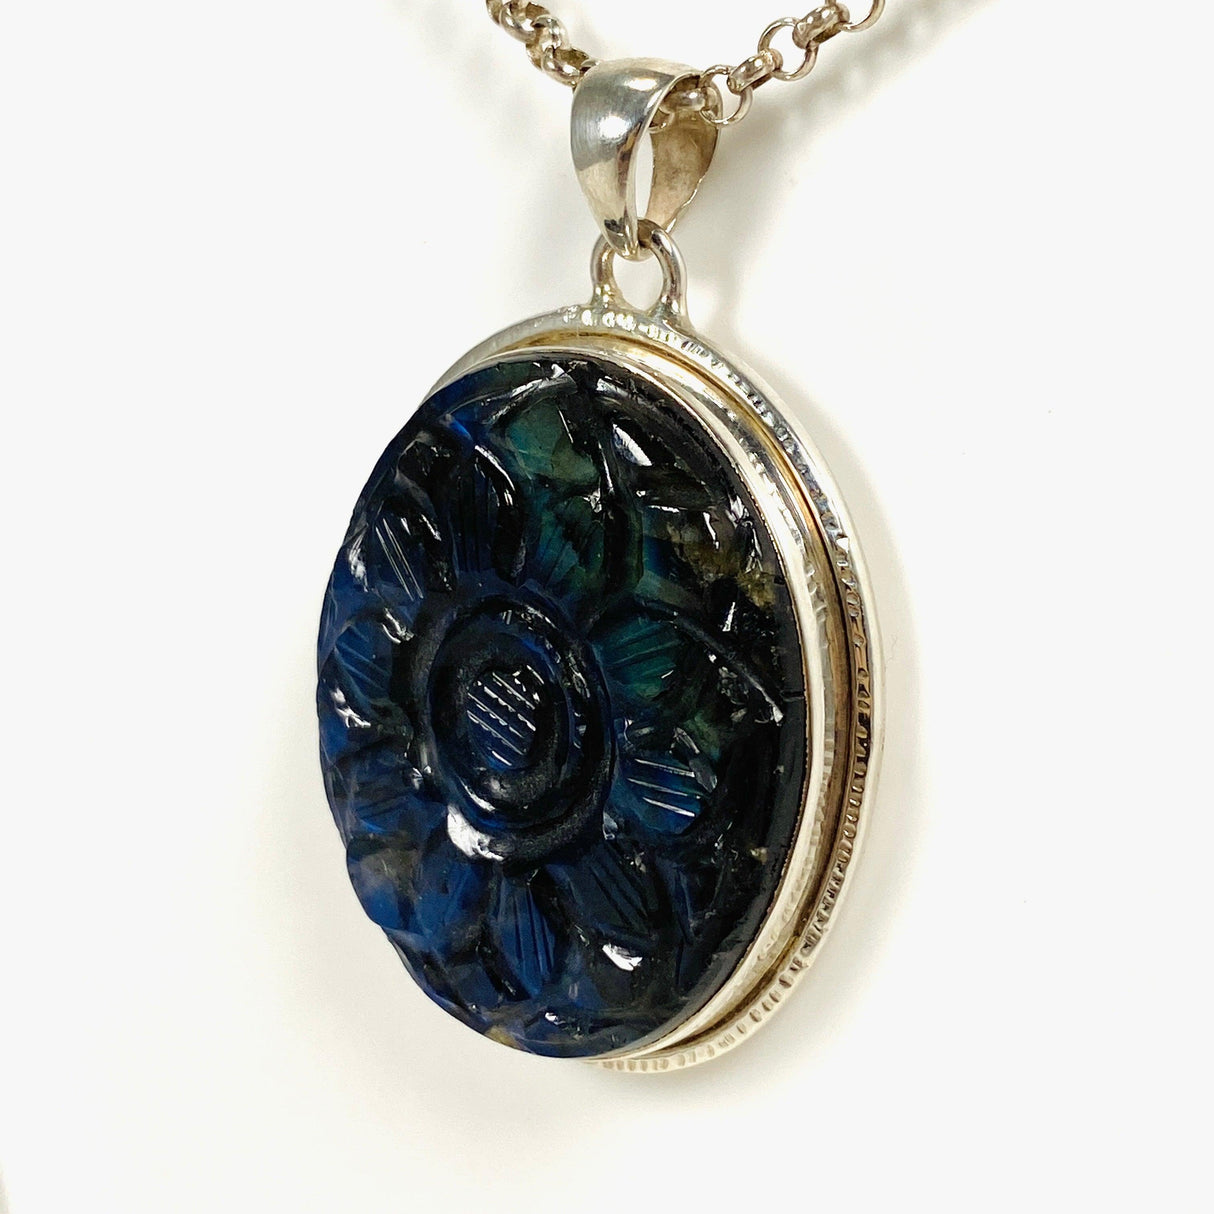 Oval shaped blue and gold flash labradorite flower carving pendant set in silver shown on a silver belcher chain